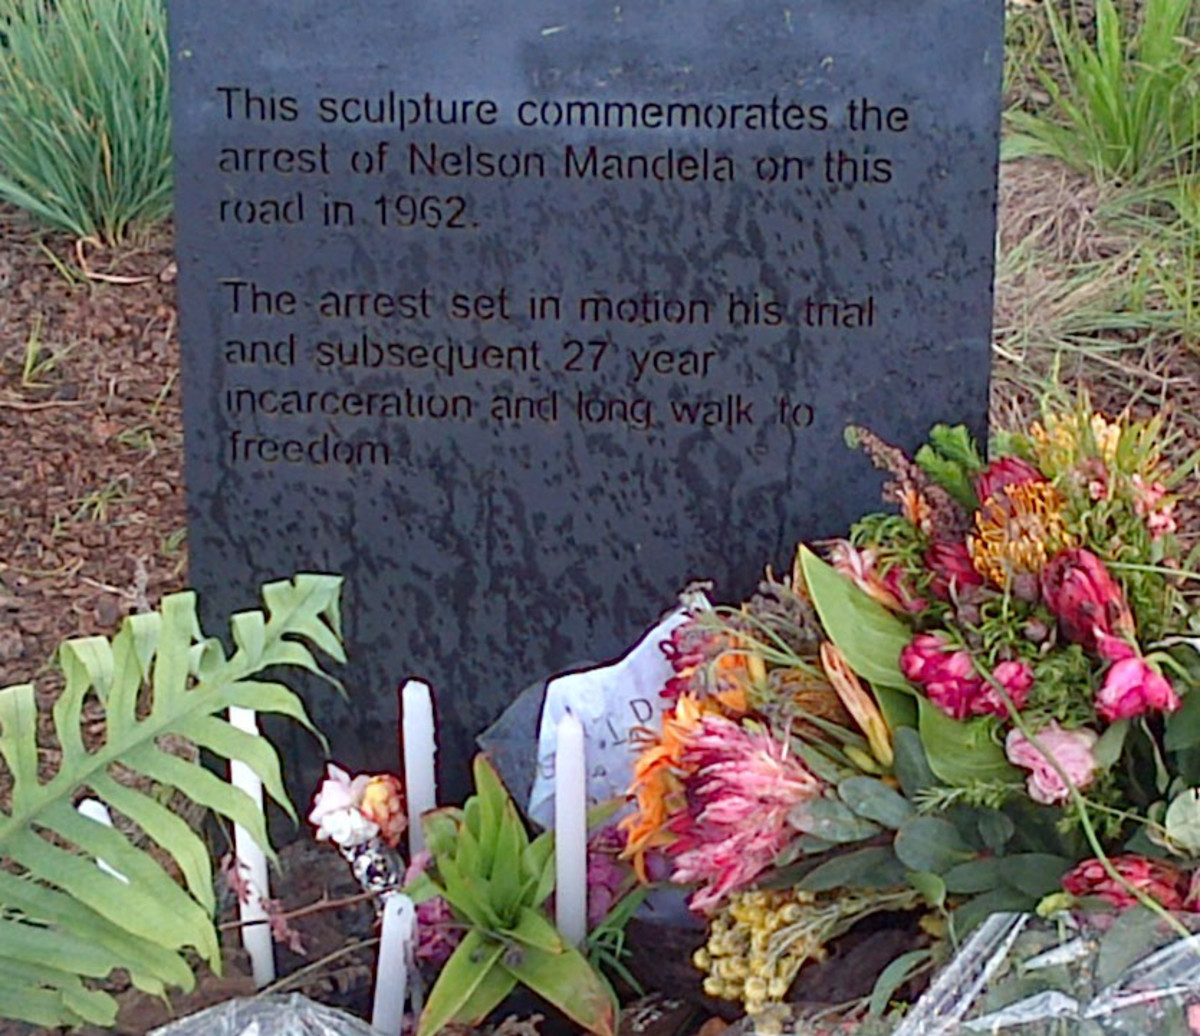 The official plaque at the foot of the sculpture